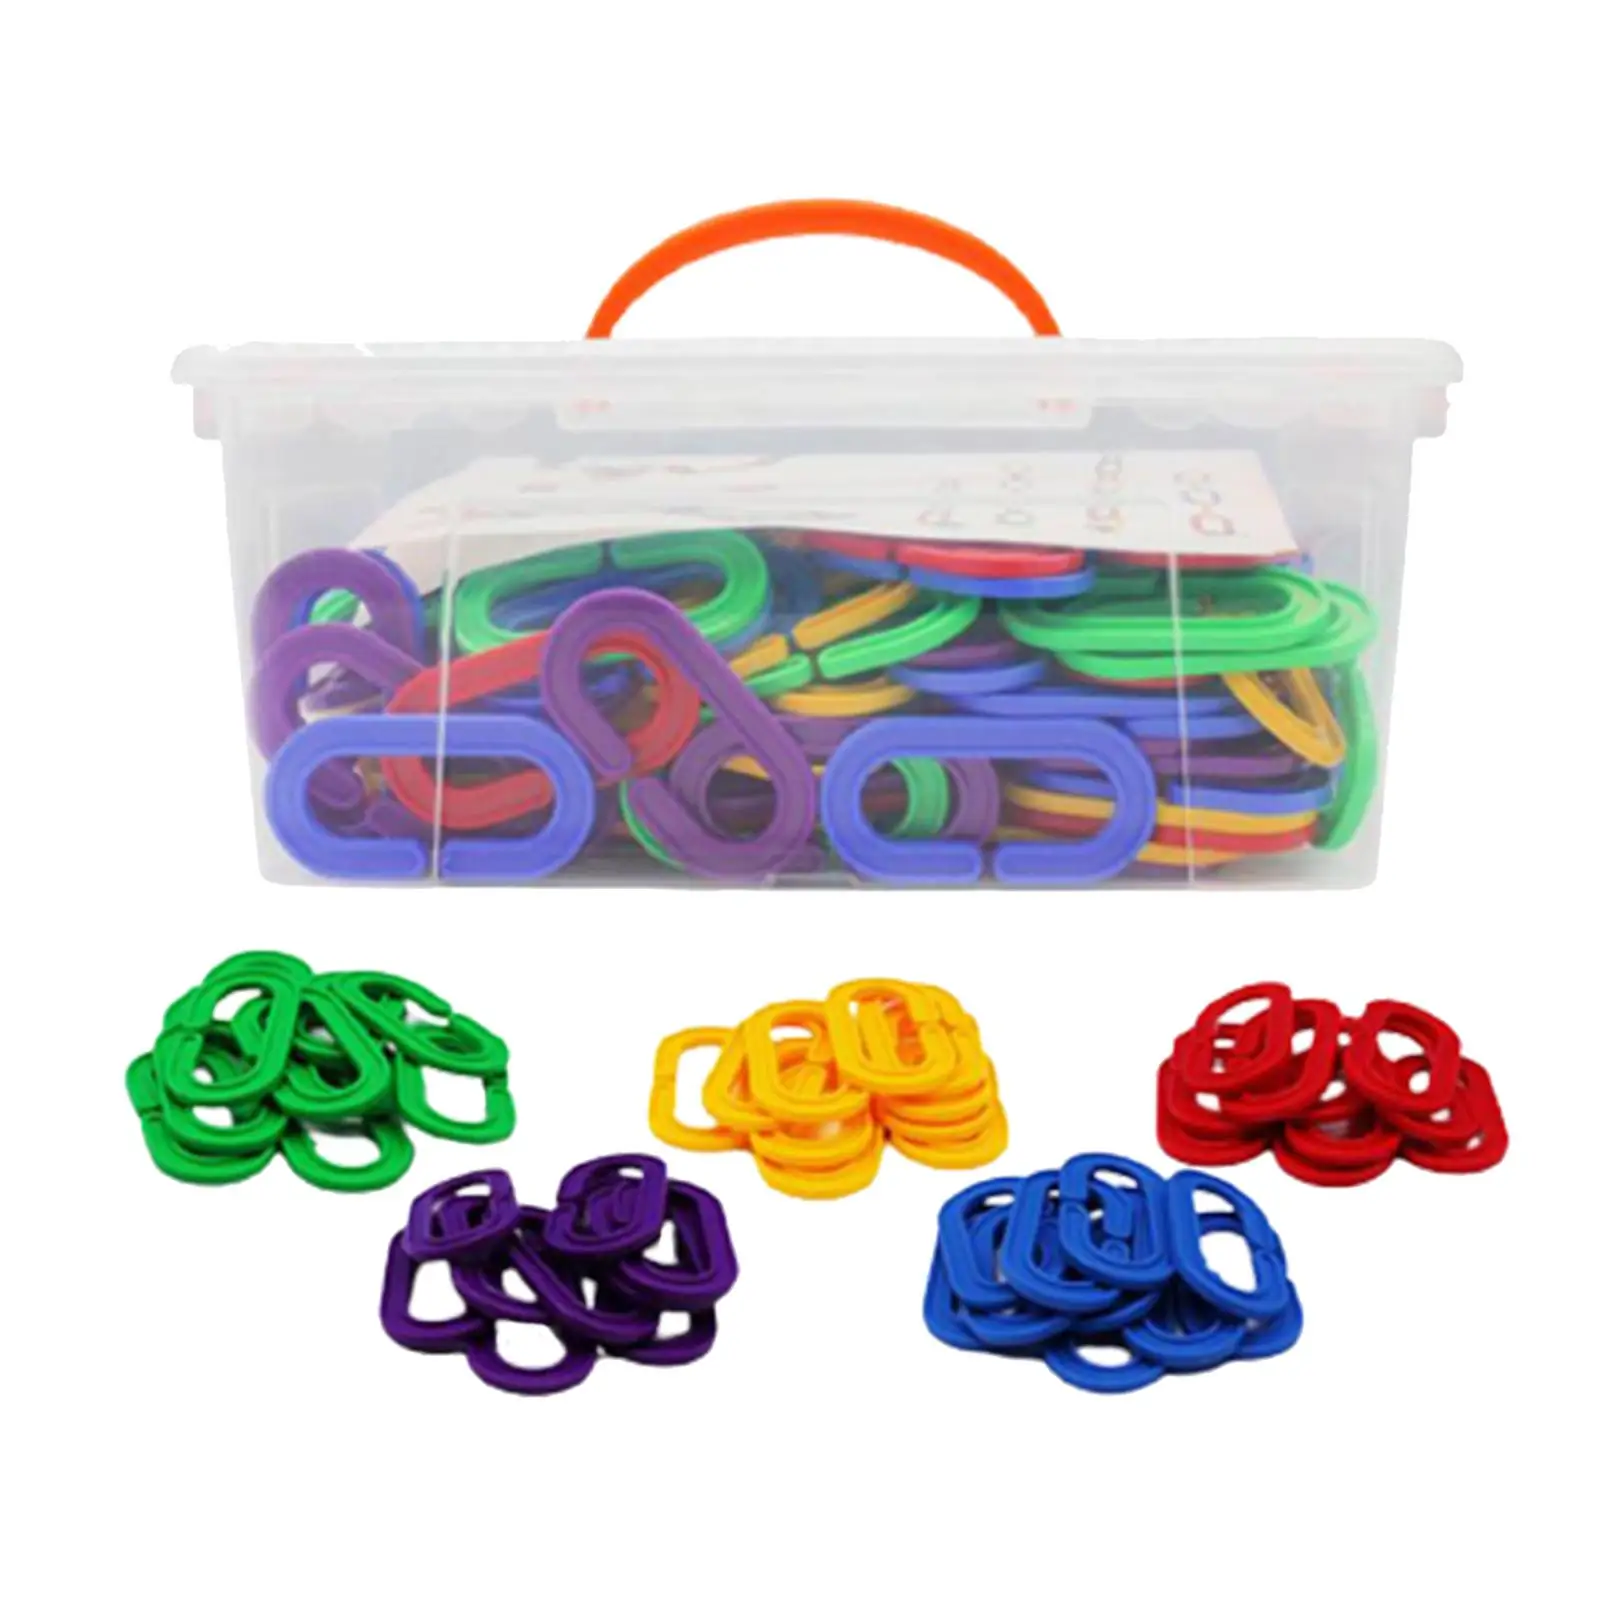 150 Pieces C Hook Counting and Sorting Educational Fine Motor Bird Swing Chain Color Recognition Chain Links for Playroom